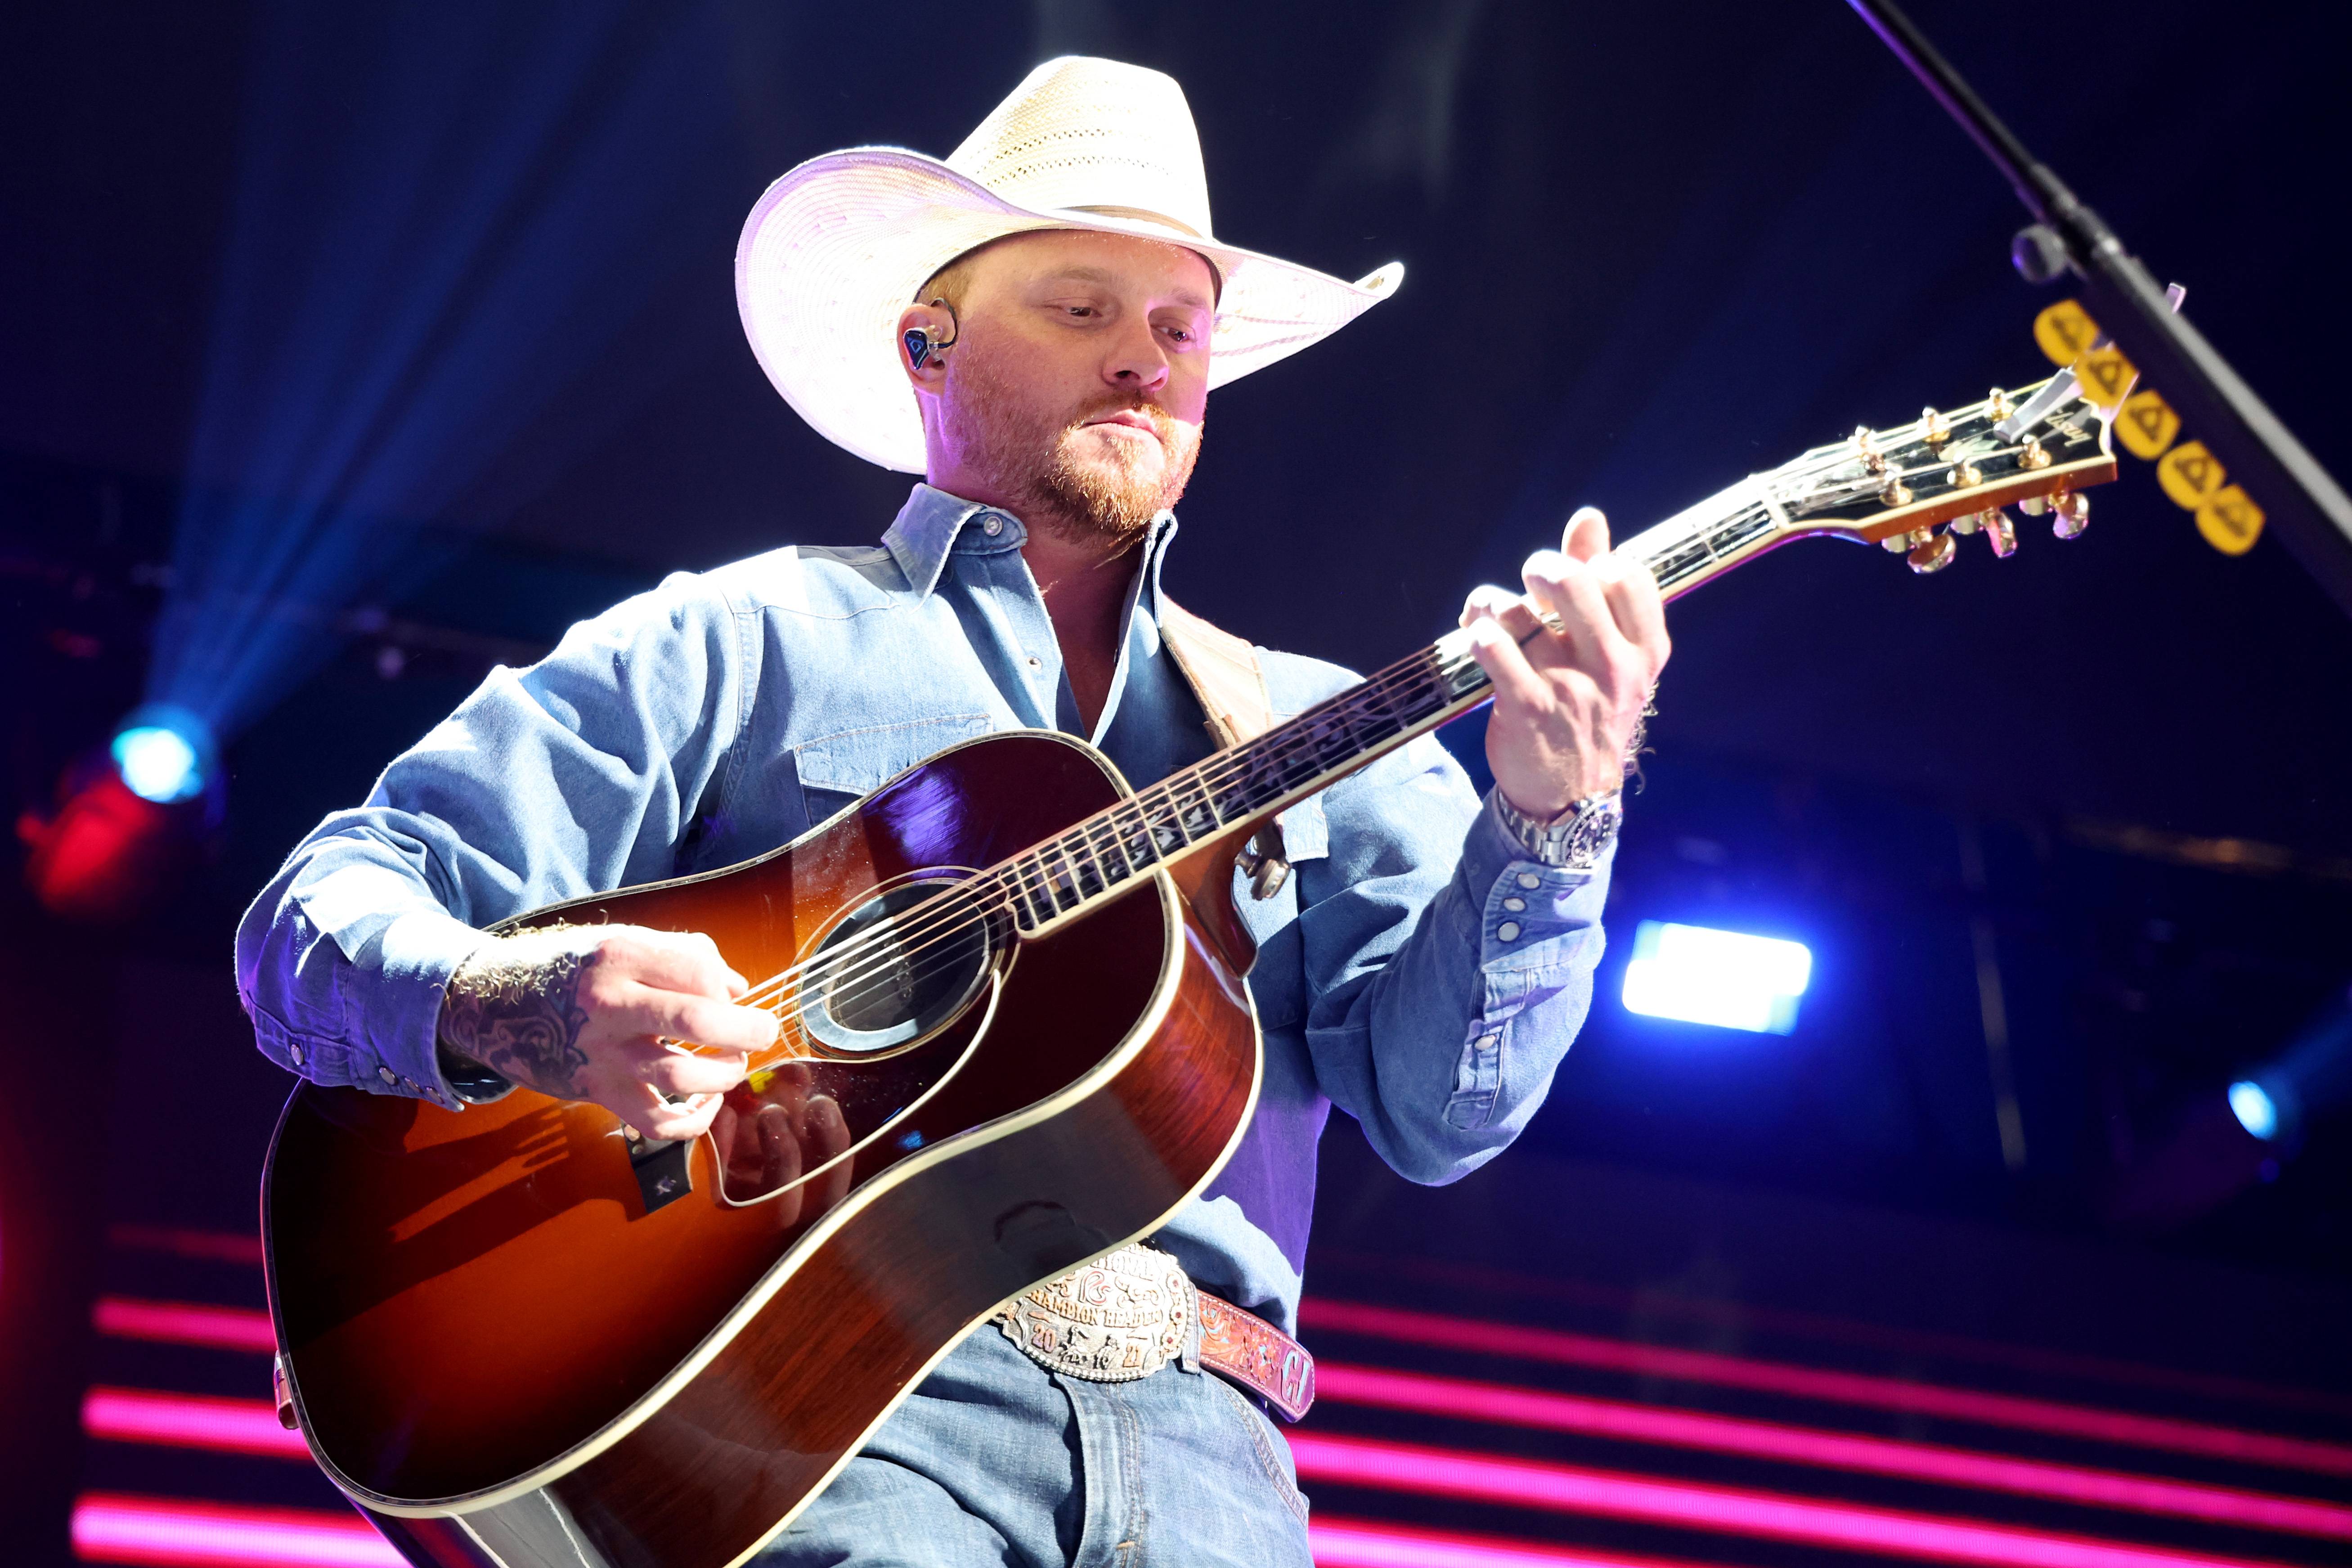 AUSTIN, TEXAS - MAY 07: (EDITORIAL USE ONLY) Cody Johnson performs onstage during the 2022 iHeartCountry Festival presented by Capital One at the new state-of-the-art venue Moody Center on May 7, 2022 in Austin, Texas. 